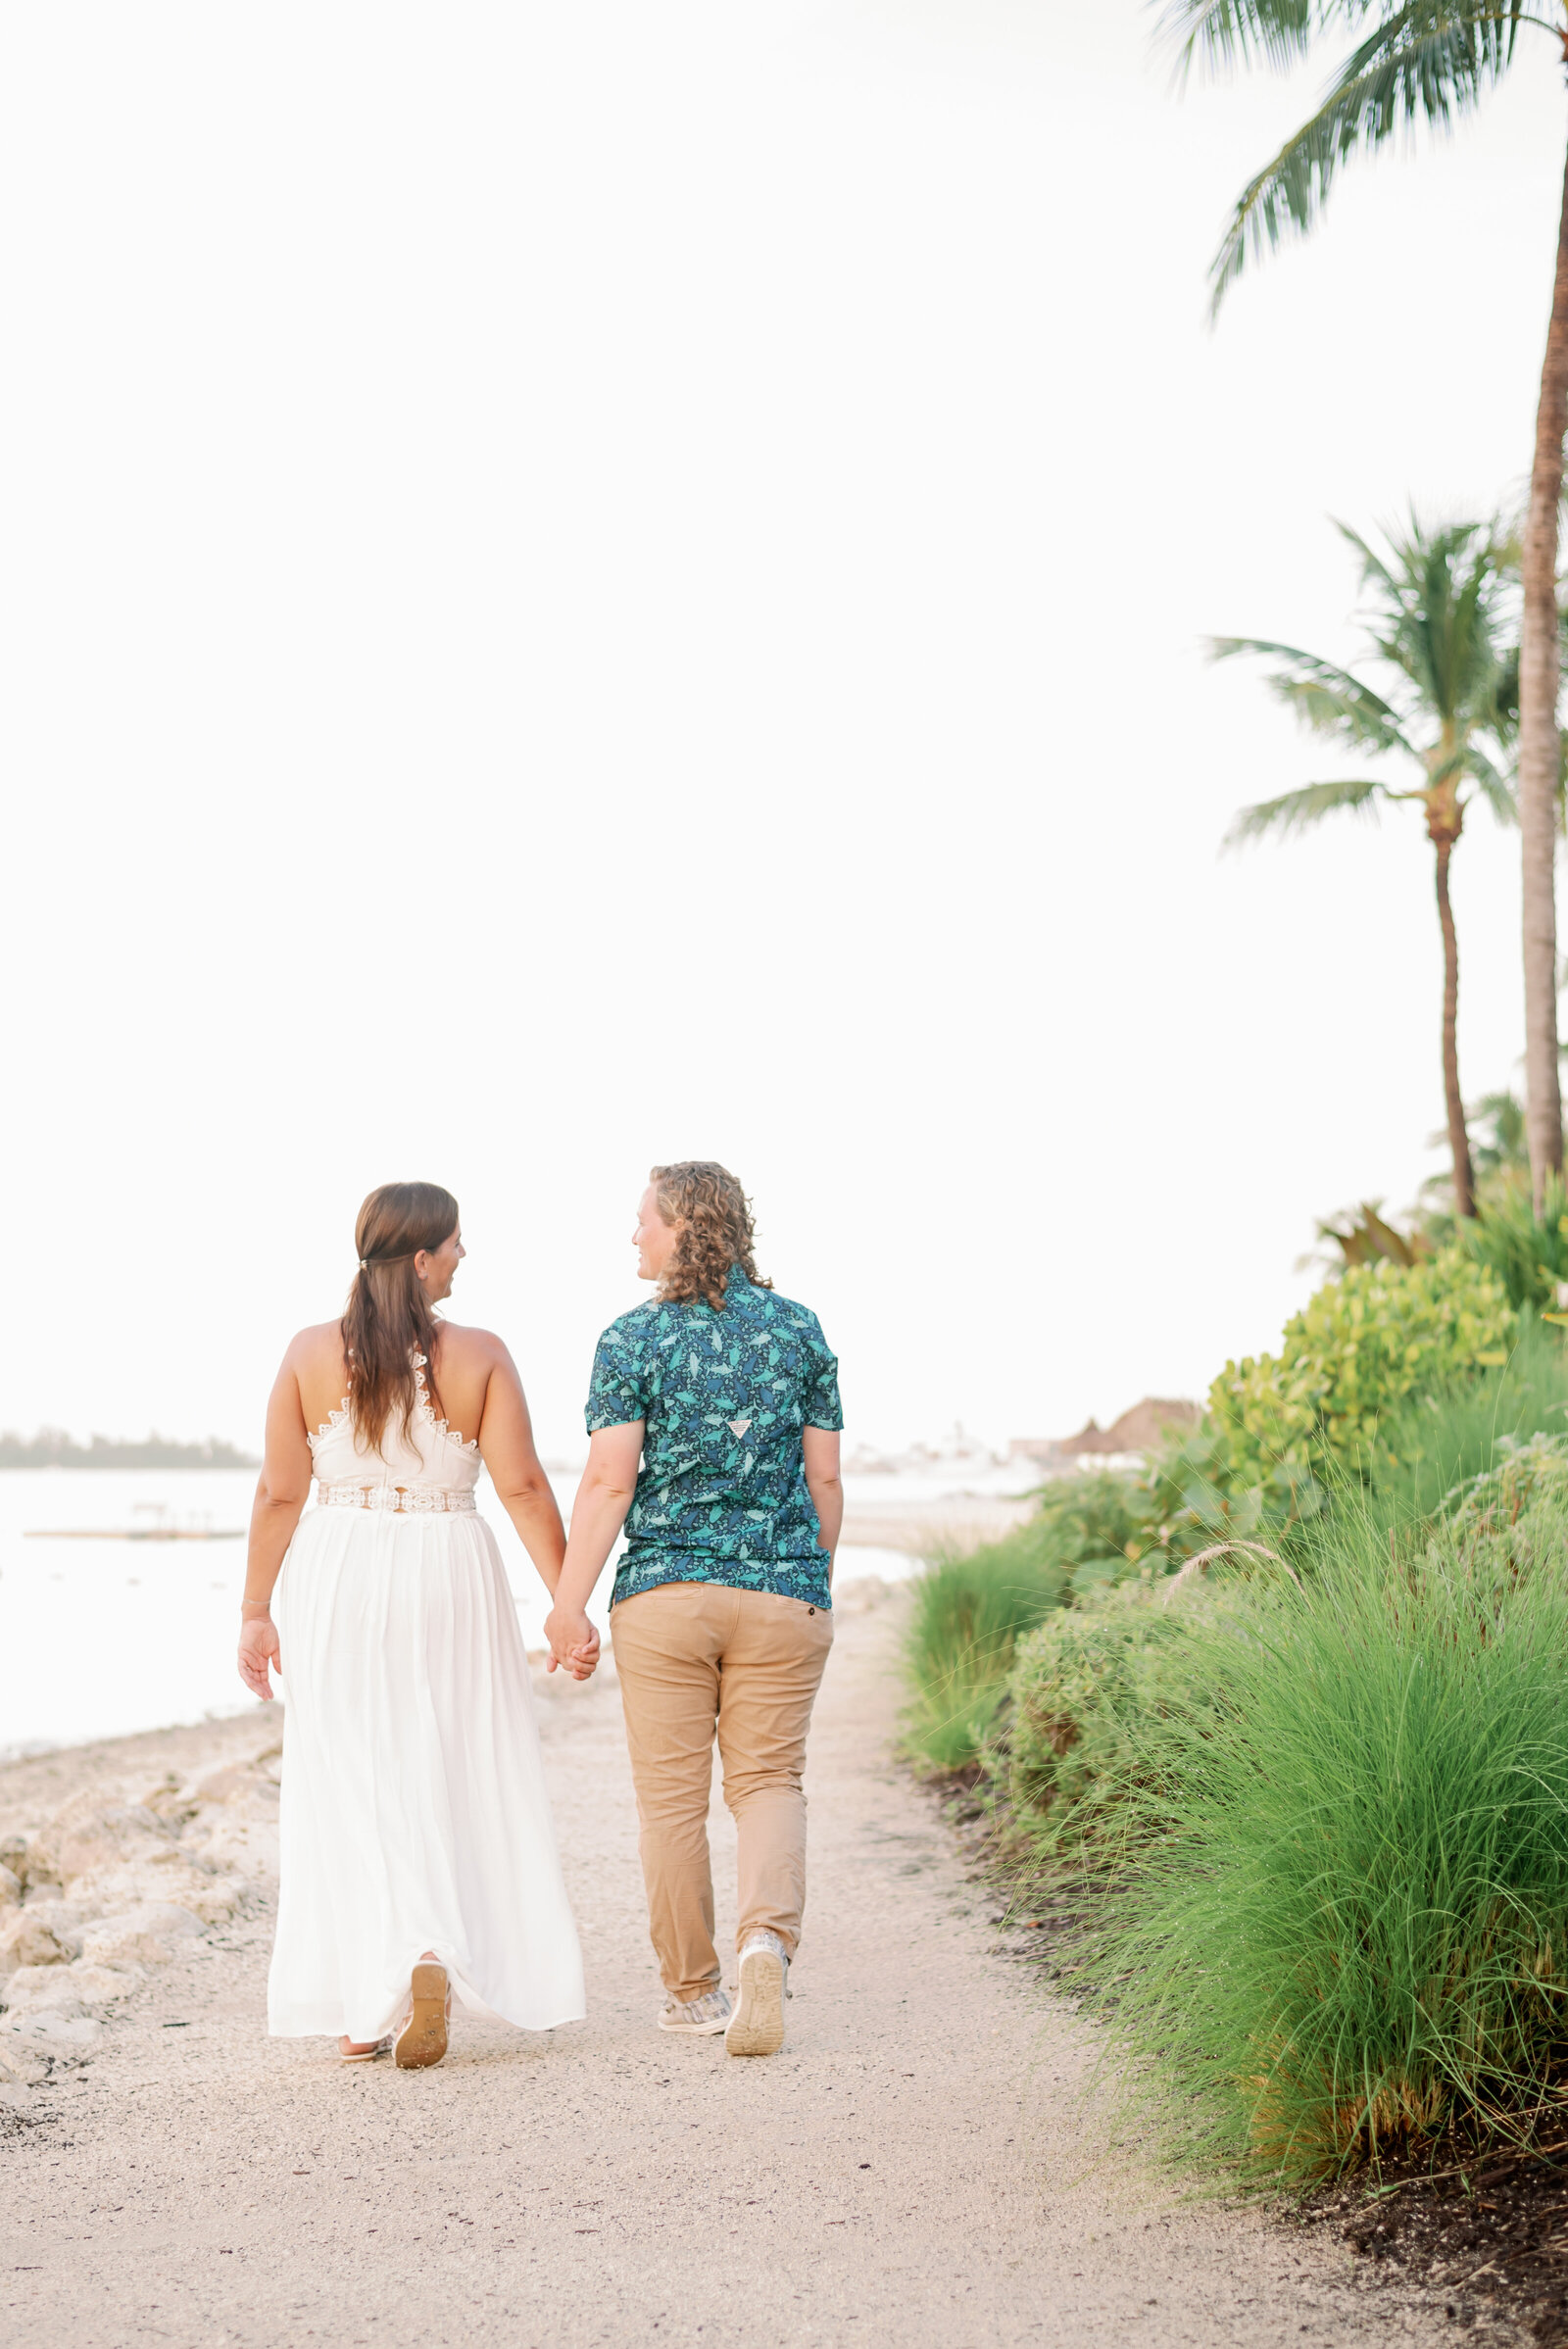 LGBTQ+ engaged couple holding hands and walking away from the camera on a beach while looking at each other